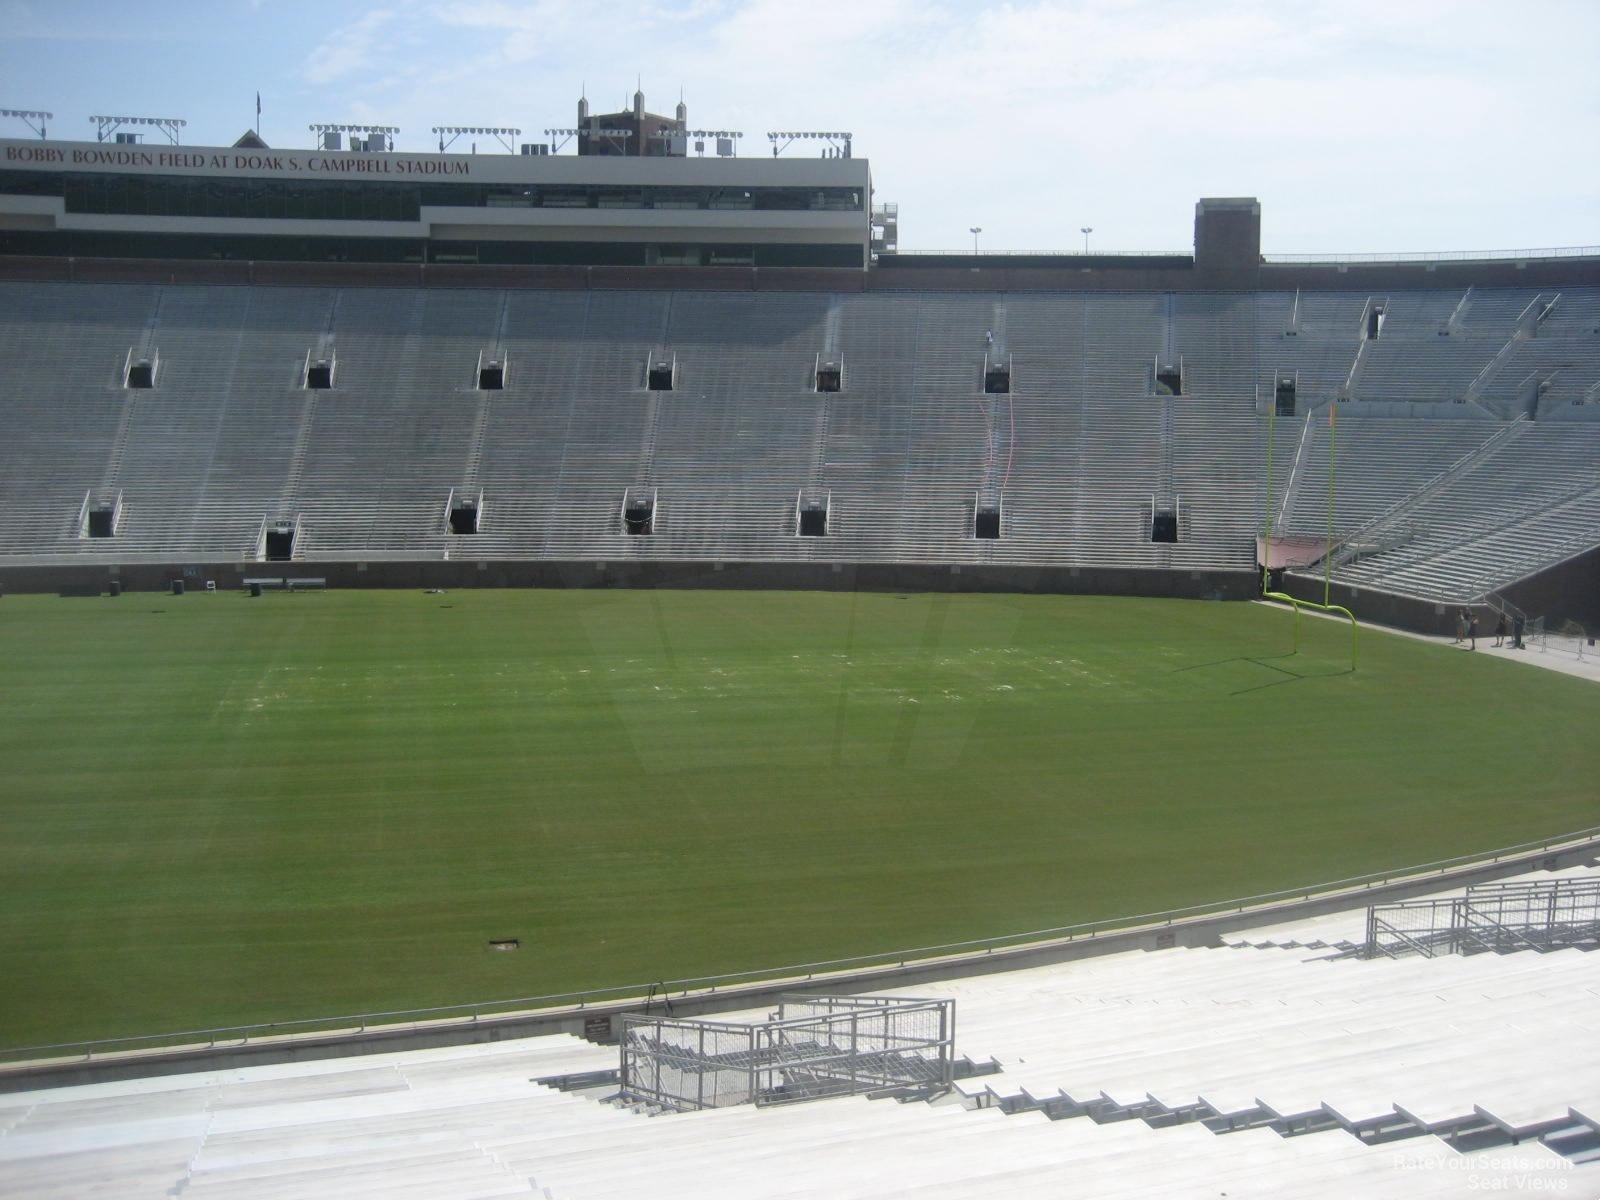 section 32, row 41 seat view  - doak campbell stadium